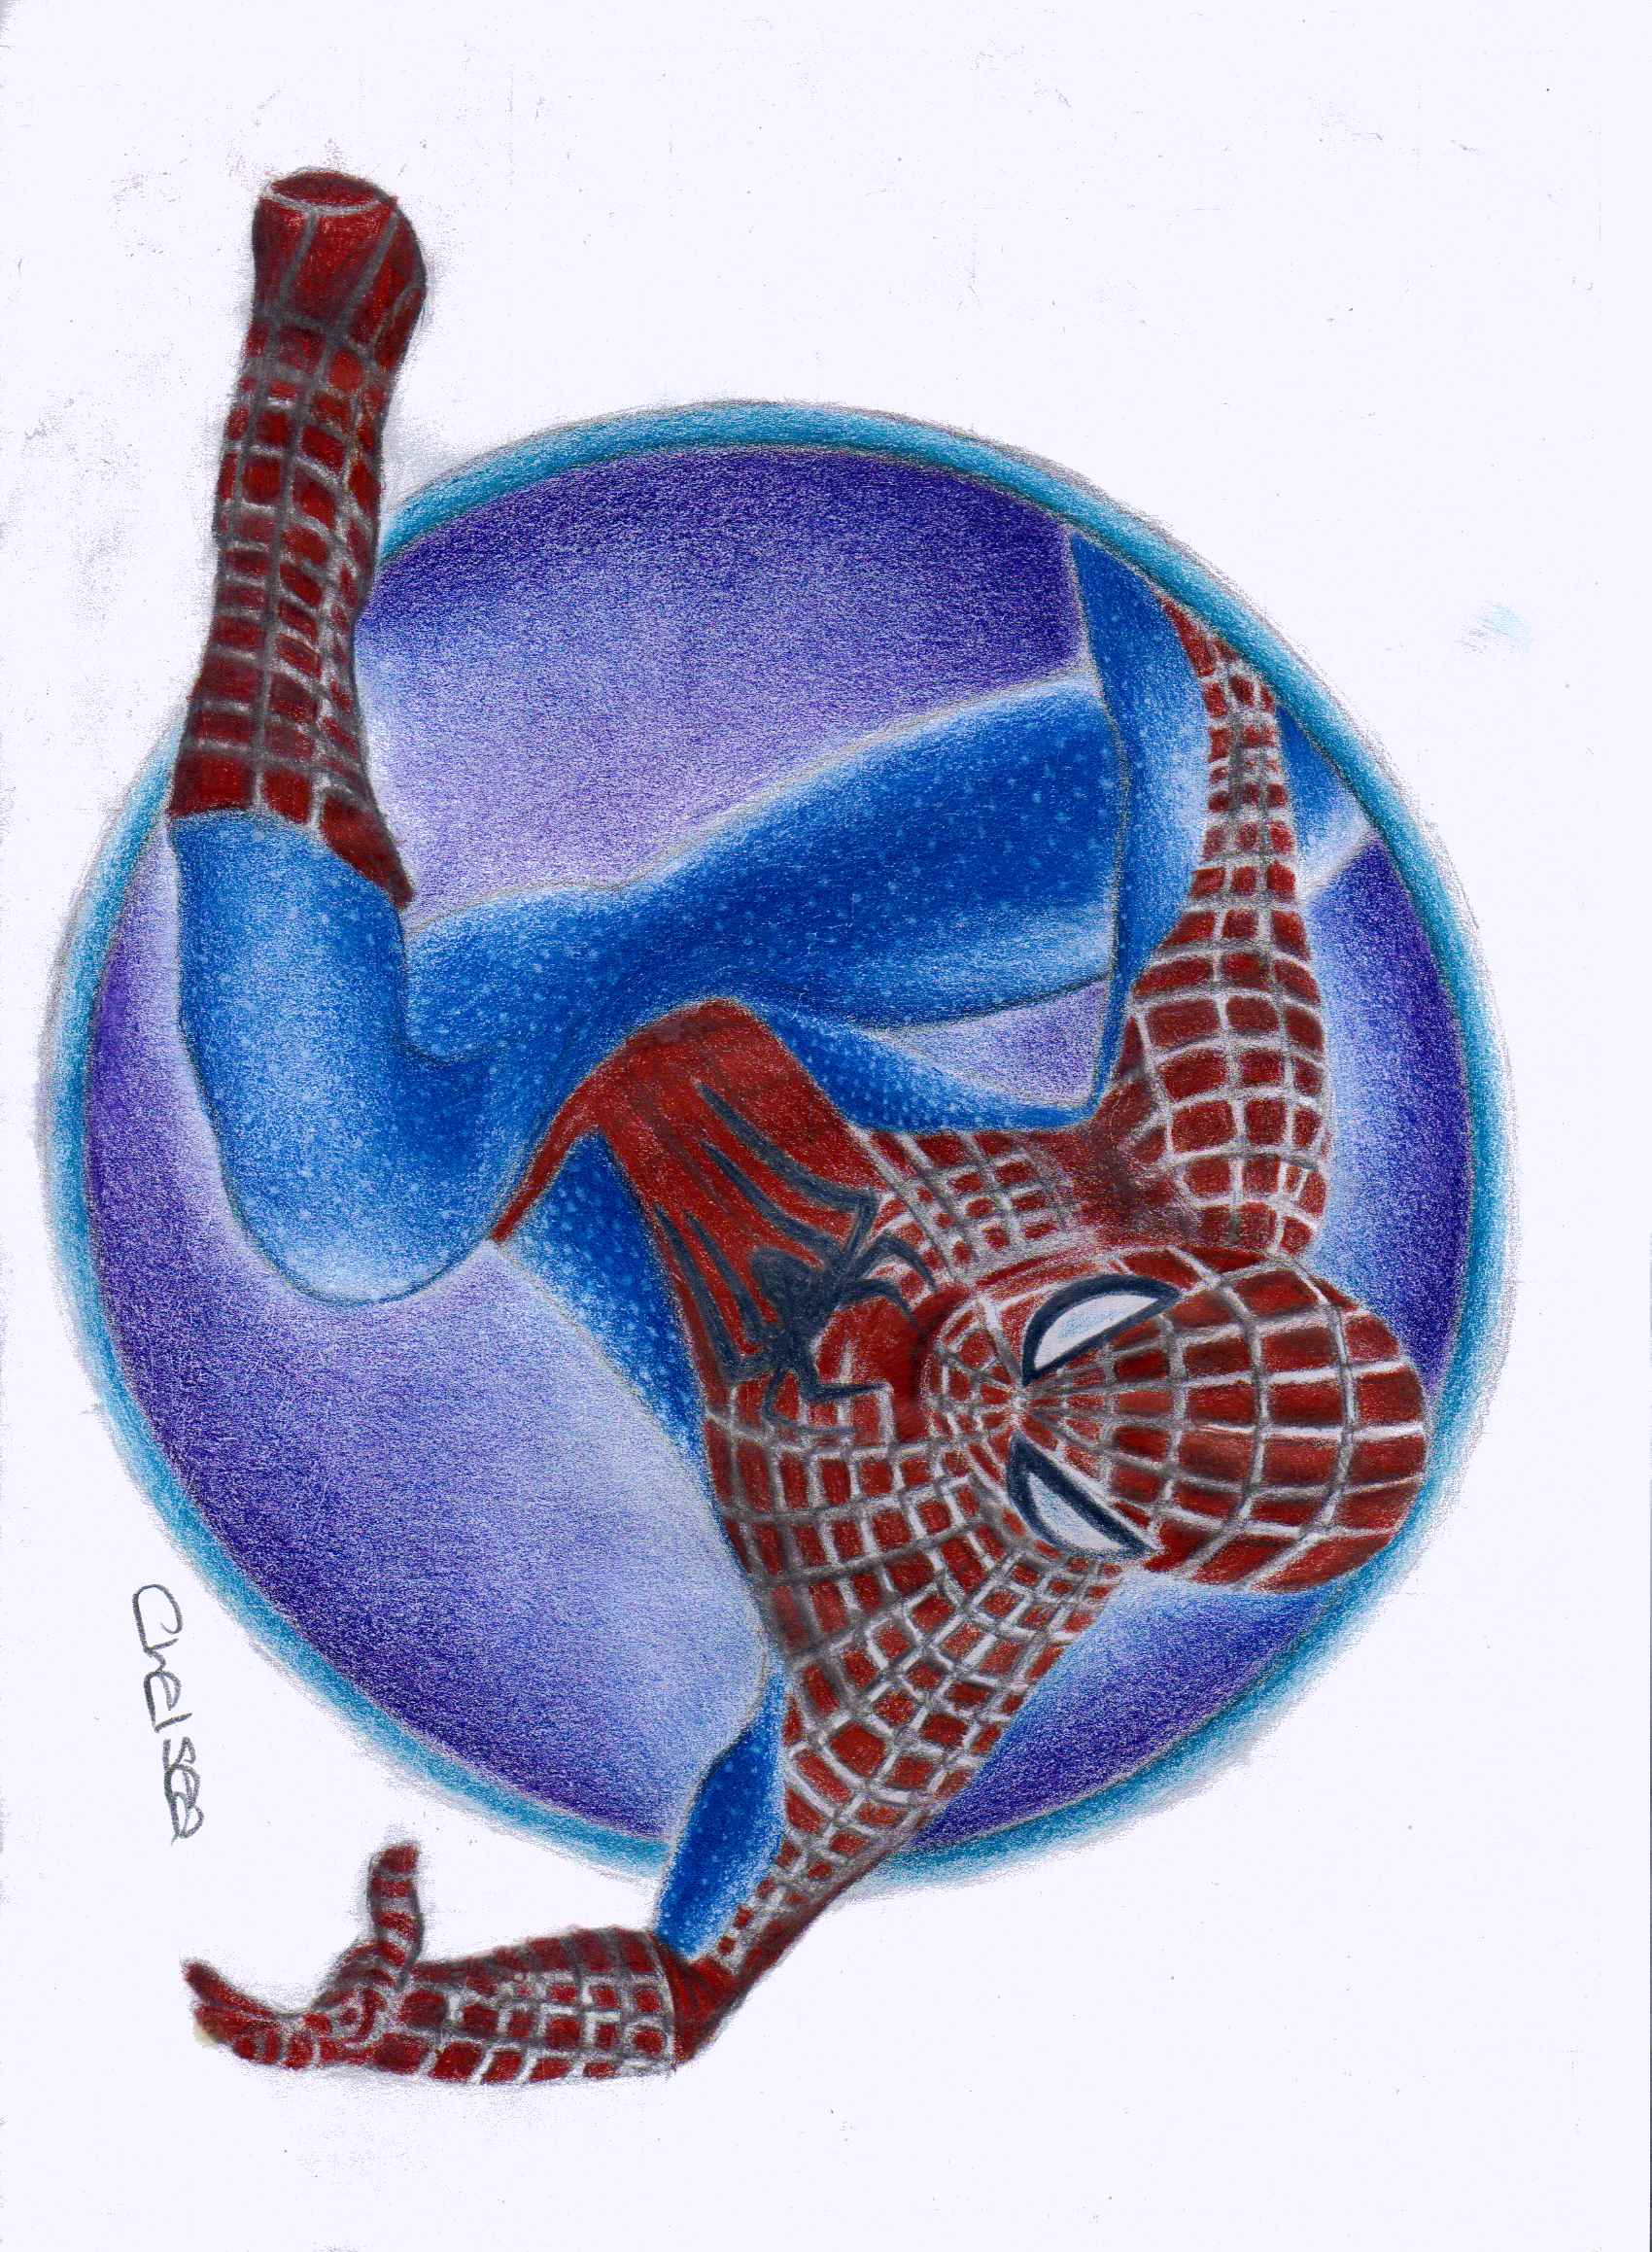 Spiderman by Chelsea93roc